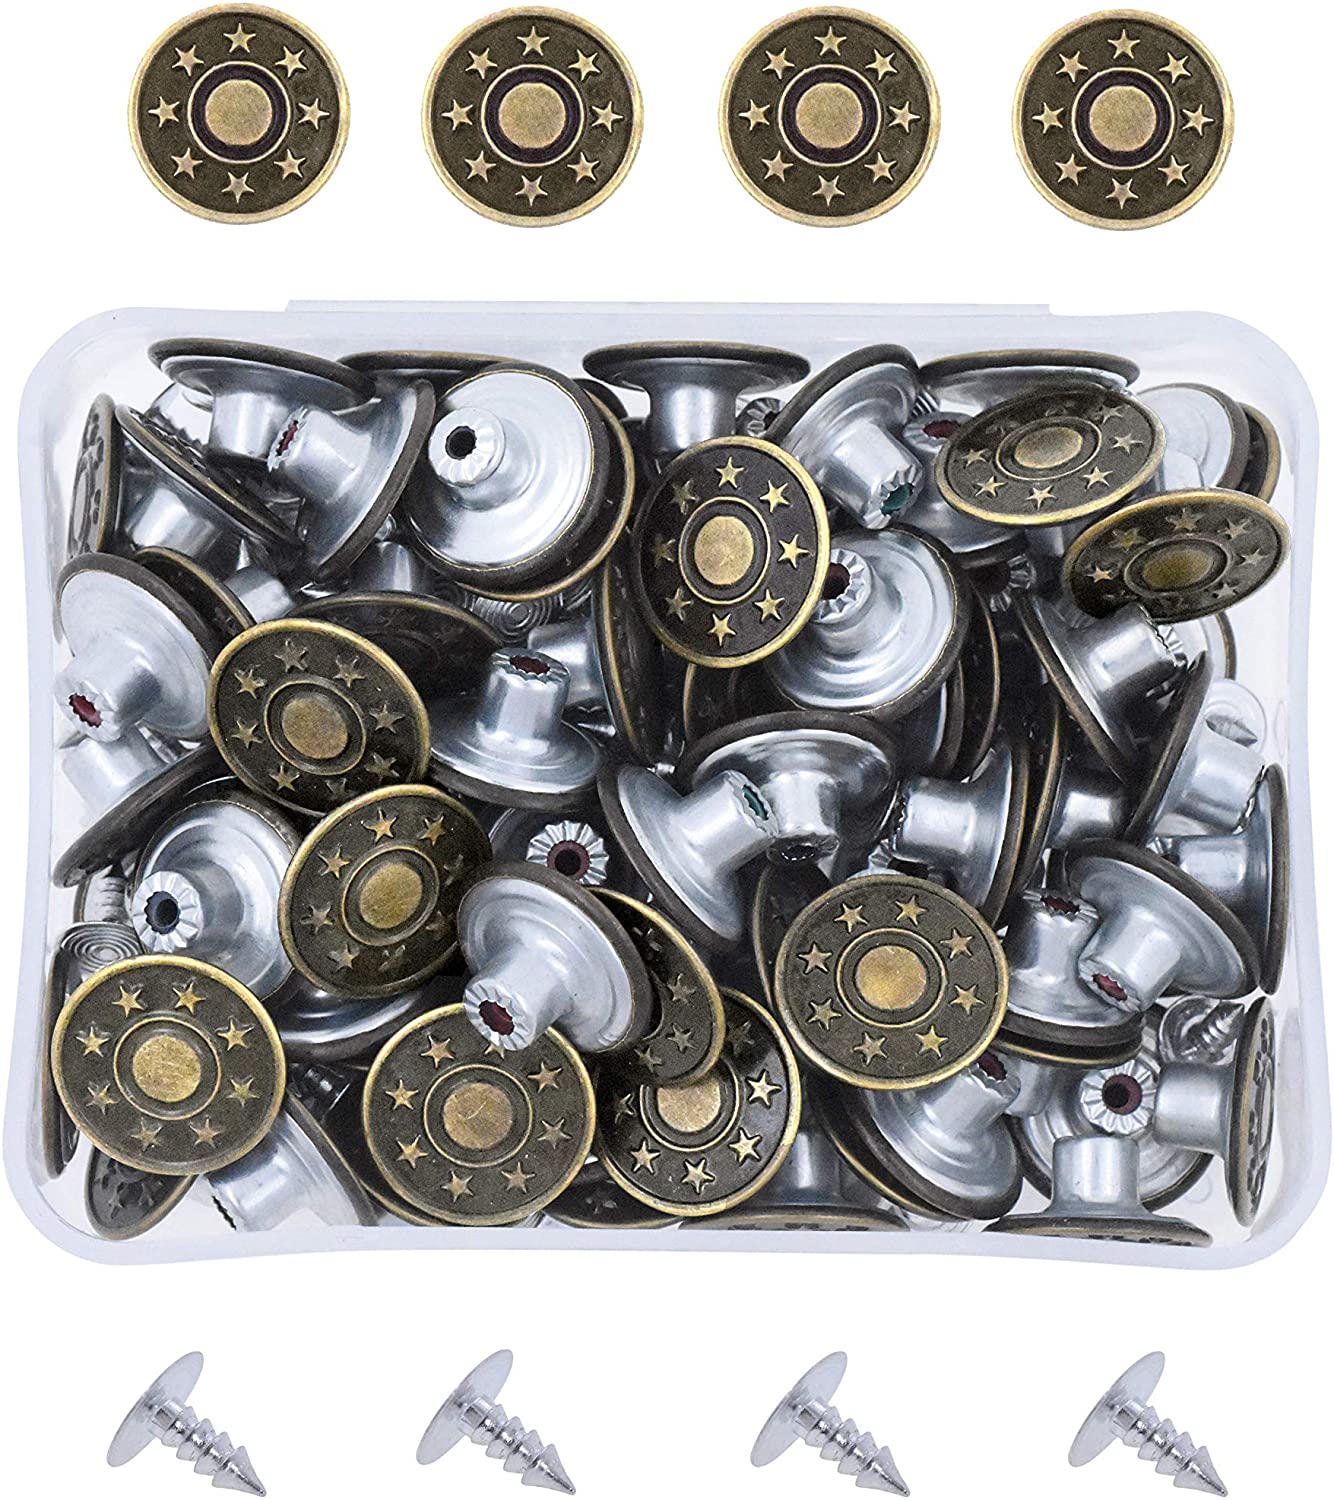  5 Styles Replacement Jeans Buttons, 15 Sets 17mm No